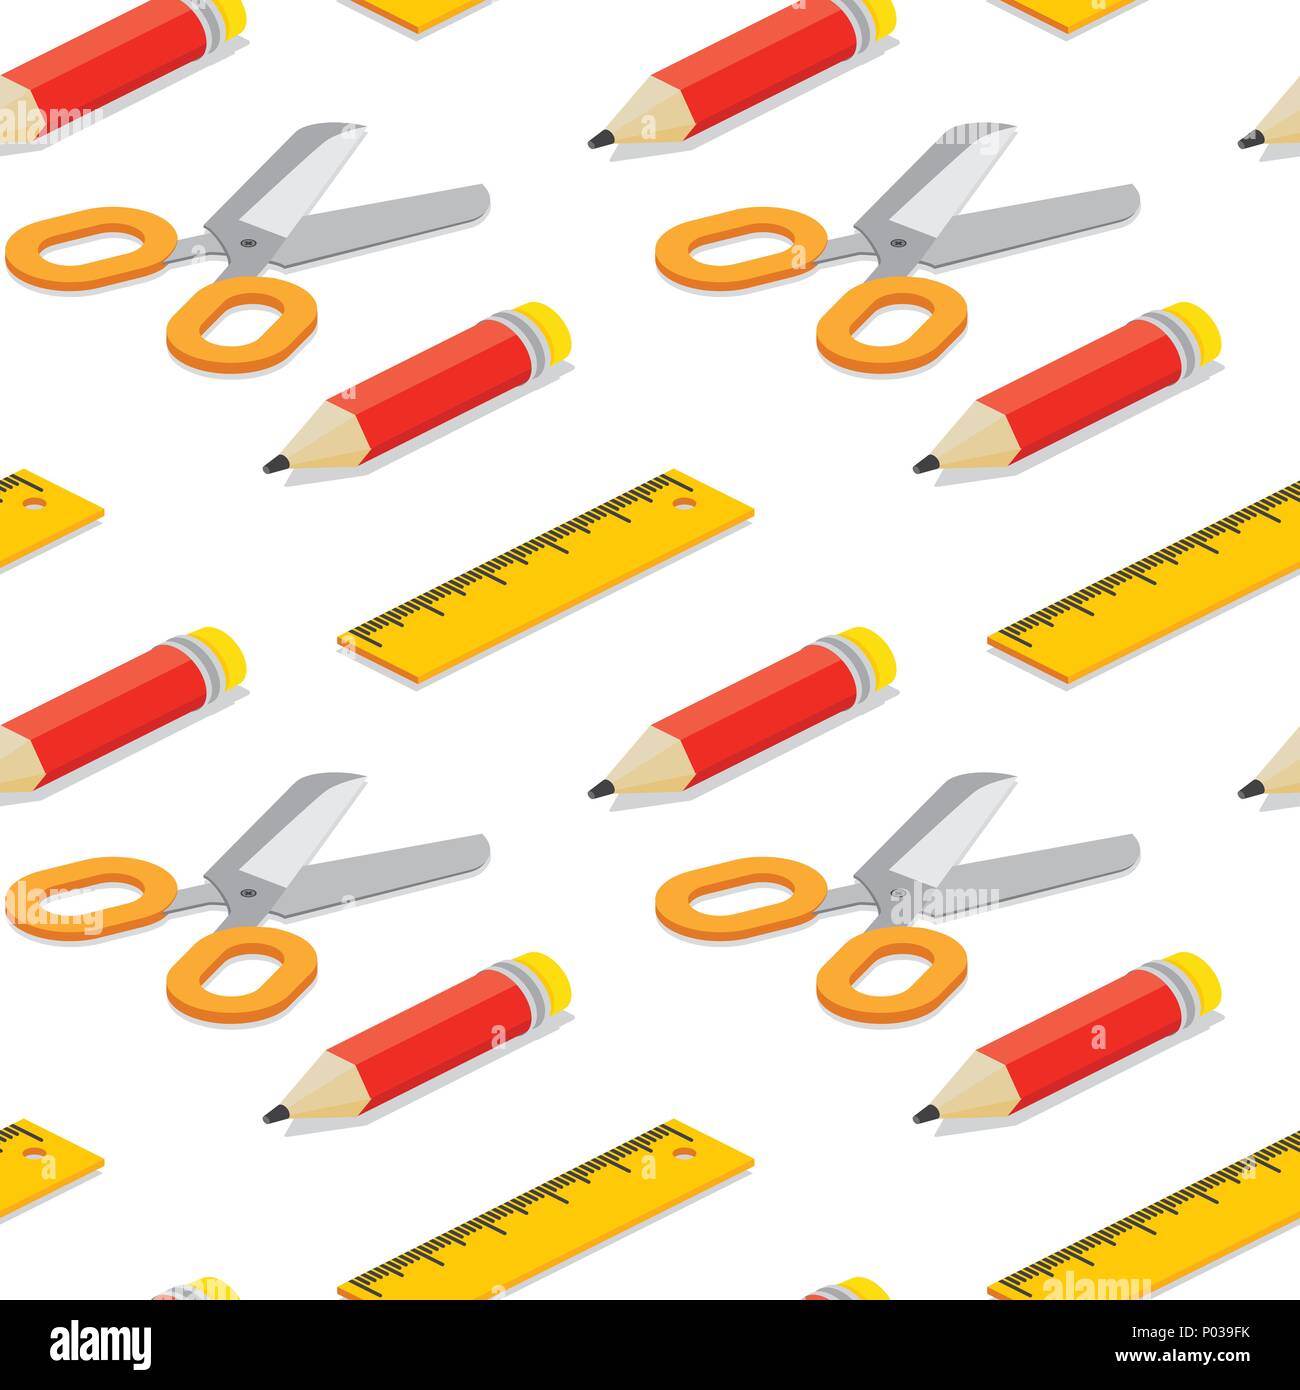 Seamless pattern with isometric pencil, ruler and scissors on white background. Vector illustration. Stock Vector